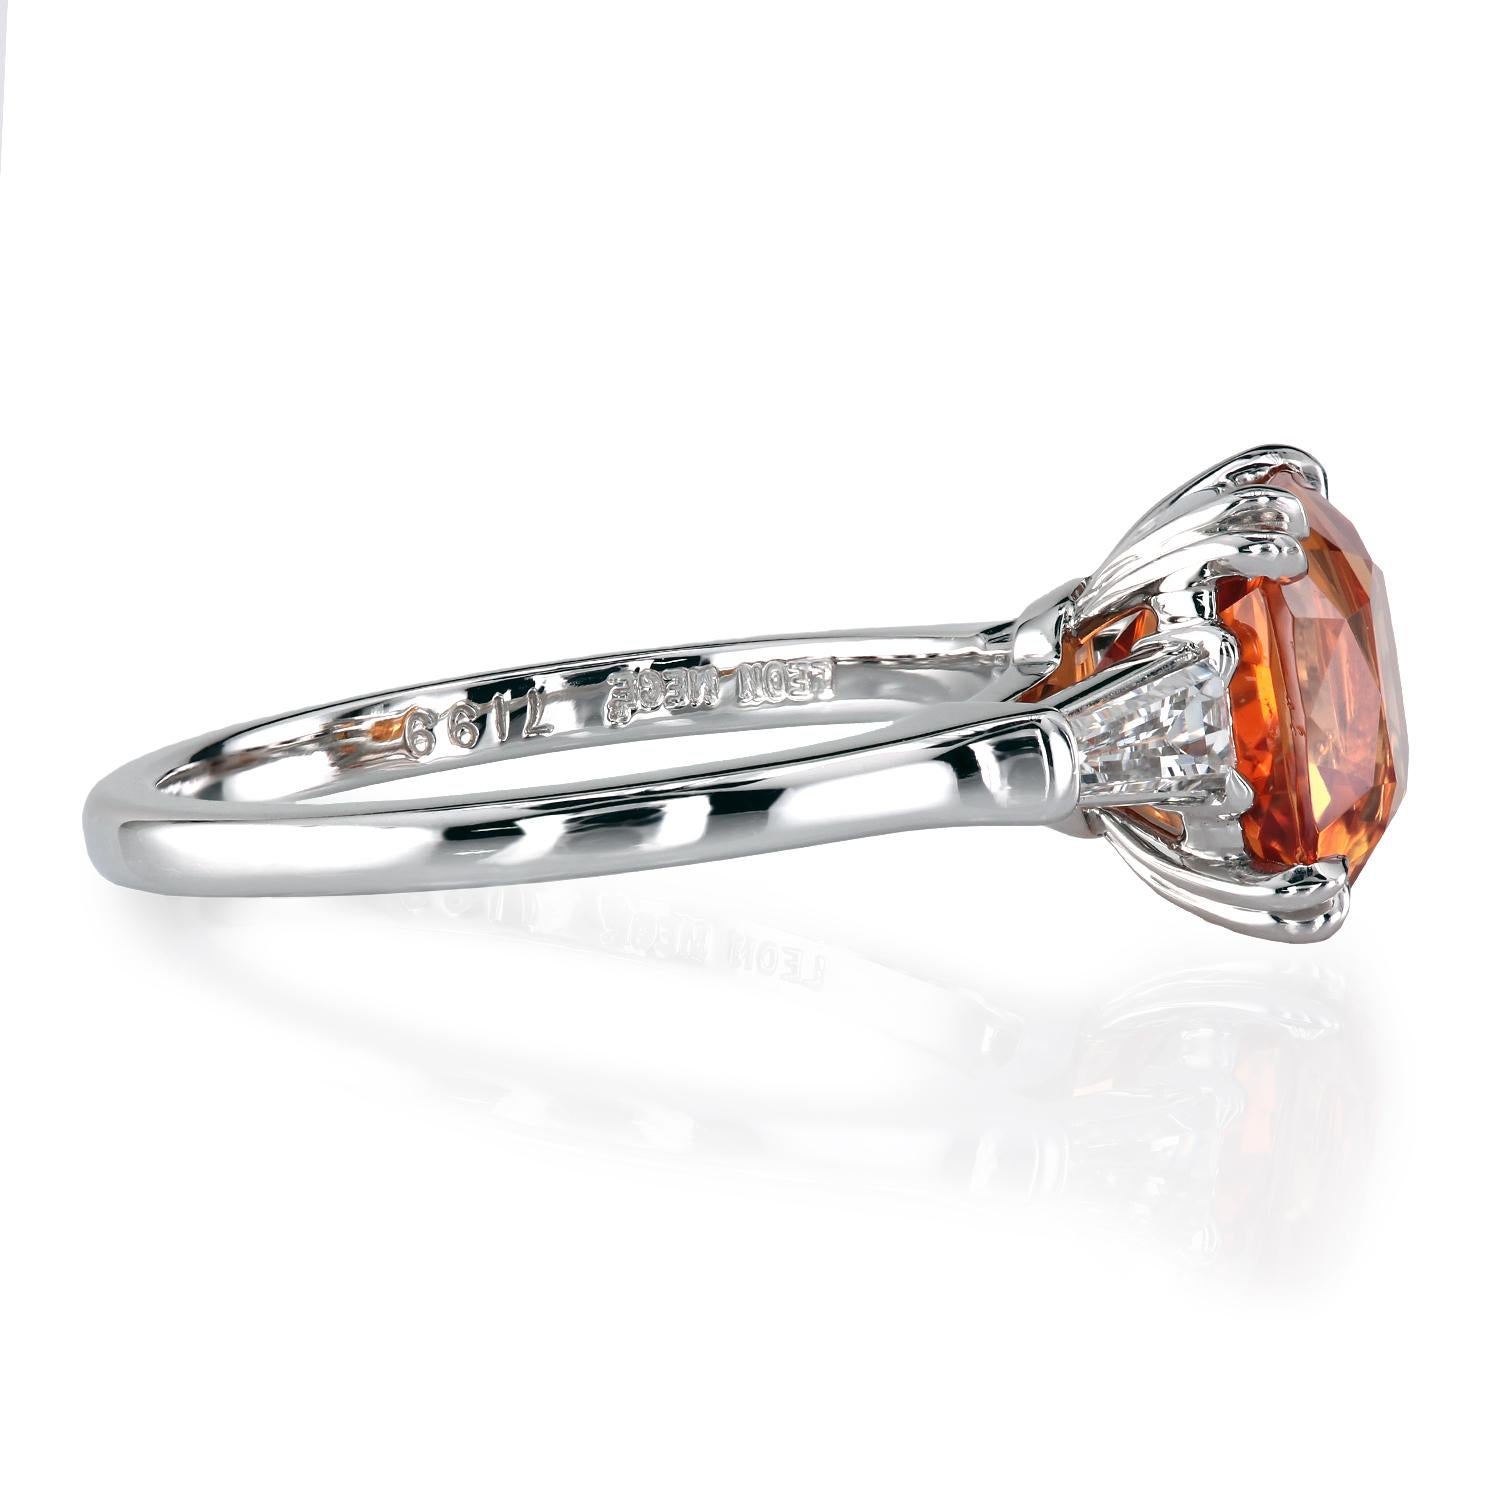 Leon Mege Platinum Three-Stone Ring with Mandarin Garnet and Diamond Baguettes In New Condition For Sale In New York, NY